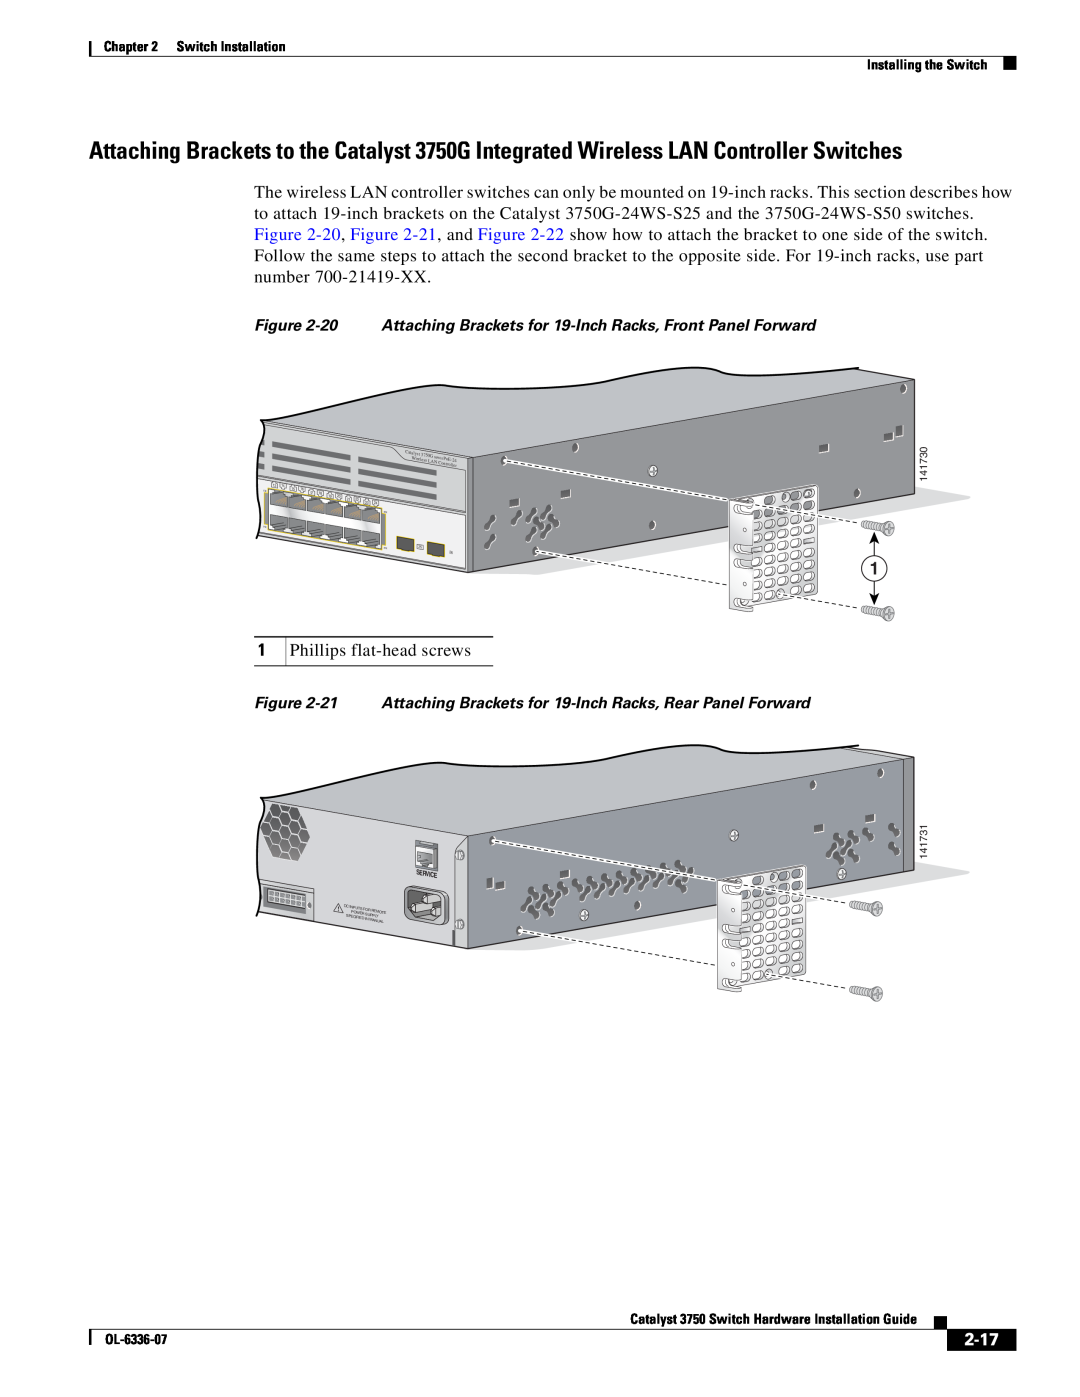 Cisco Systems WSC3750X24TS specifications 2-17, 20 Attaching Brackets for 19-Inch Racks, Front Panel Forward, Service 